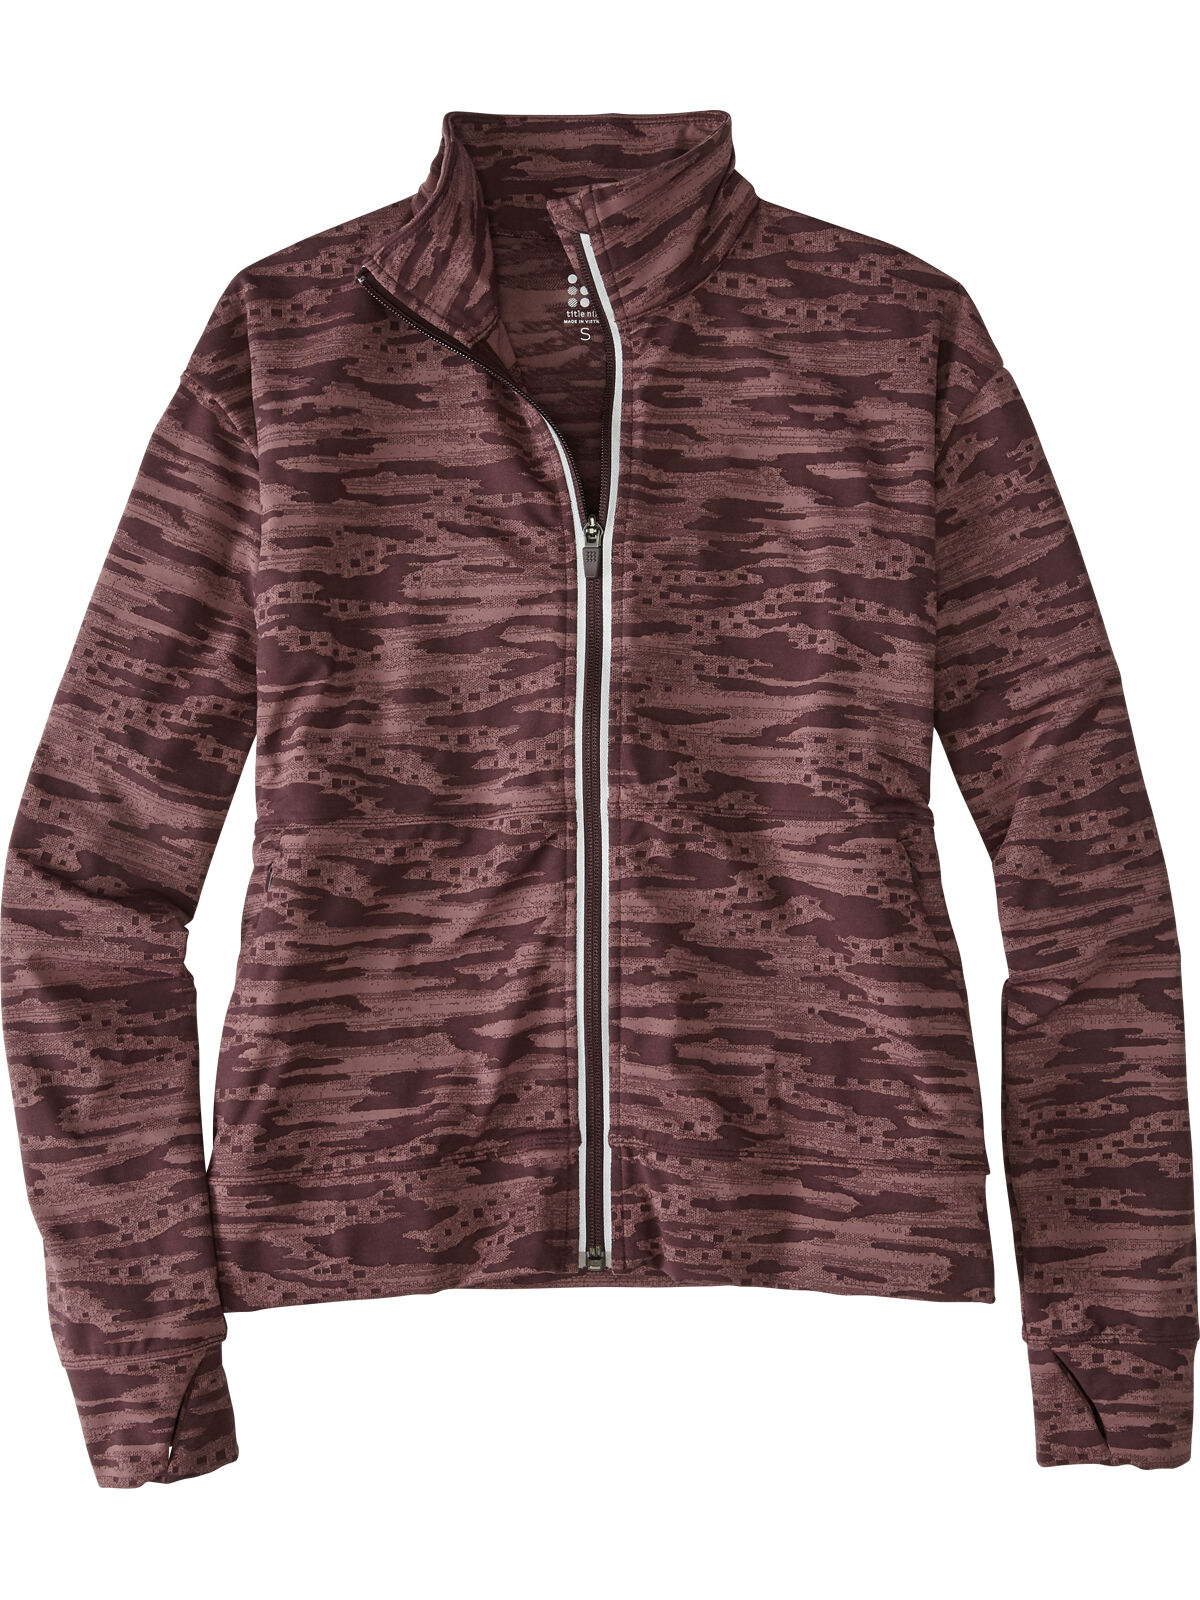 Kalenji By Decathlon Women White Solid Windcheater and Water Resistant  Sporty Jacket Price in India, Full Specifications & Offers | DTashion.com